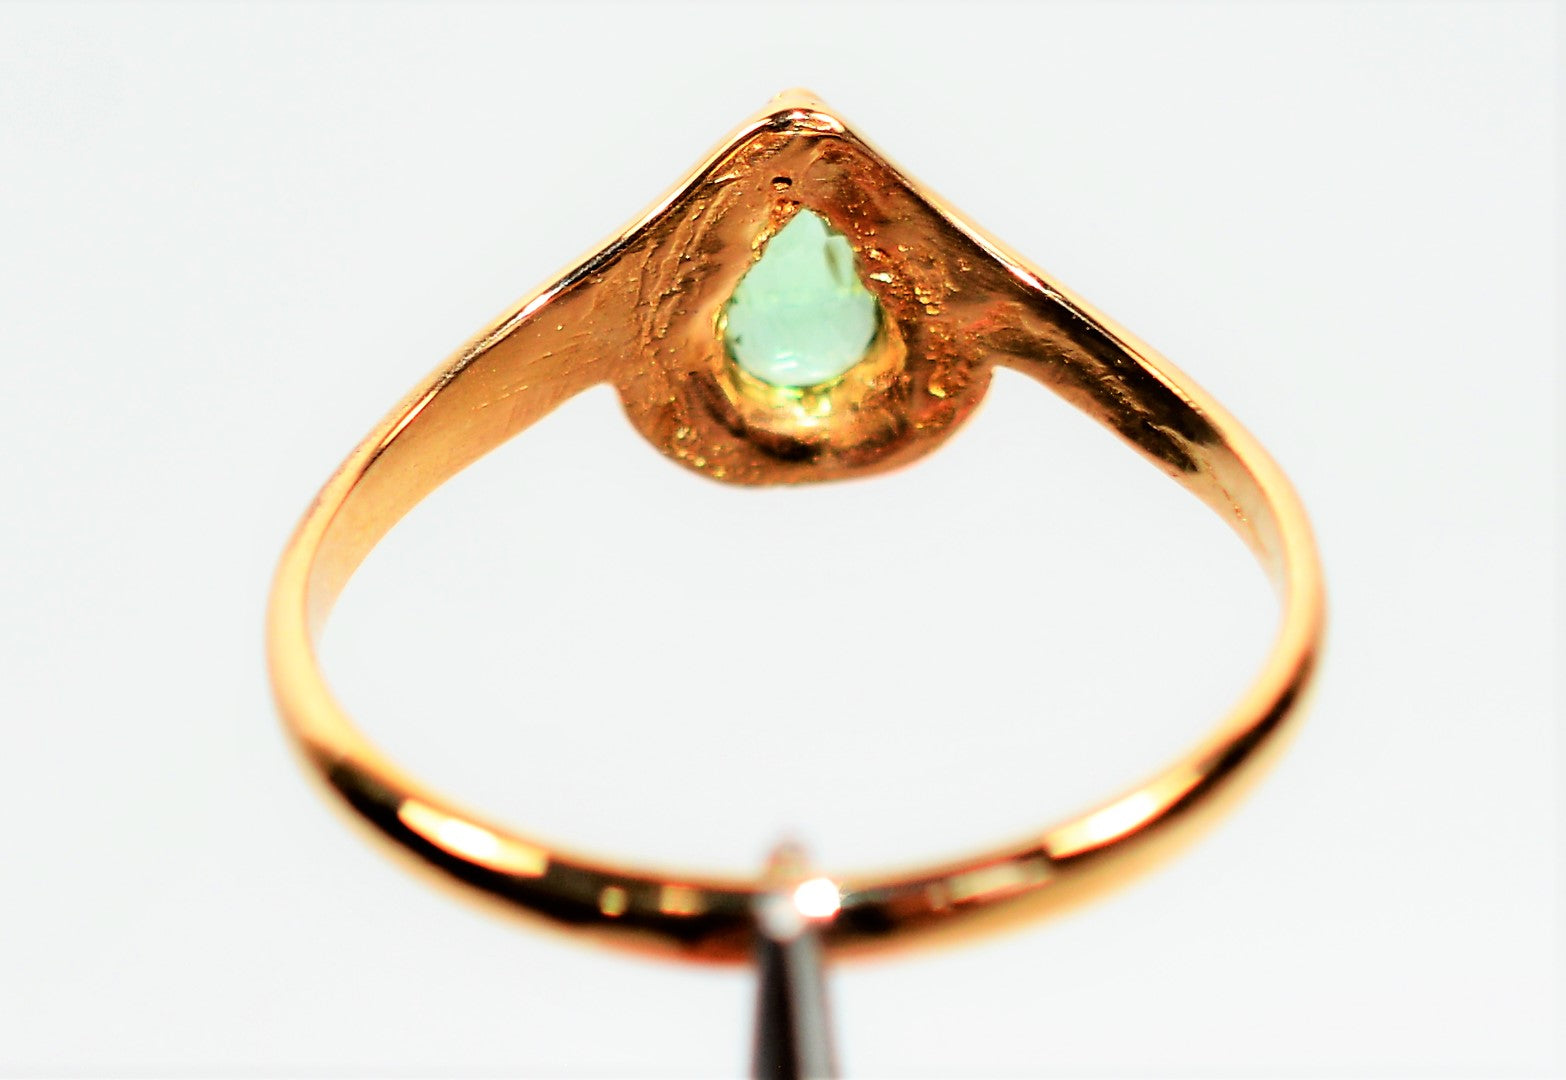 Natural Paraiba Tourmaline Ring 18K Solid Gold .34ct Solitaire Ring Fine Women's Ring Estate Jewelry Gemstone Ring Statement Ring Birthstone